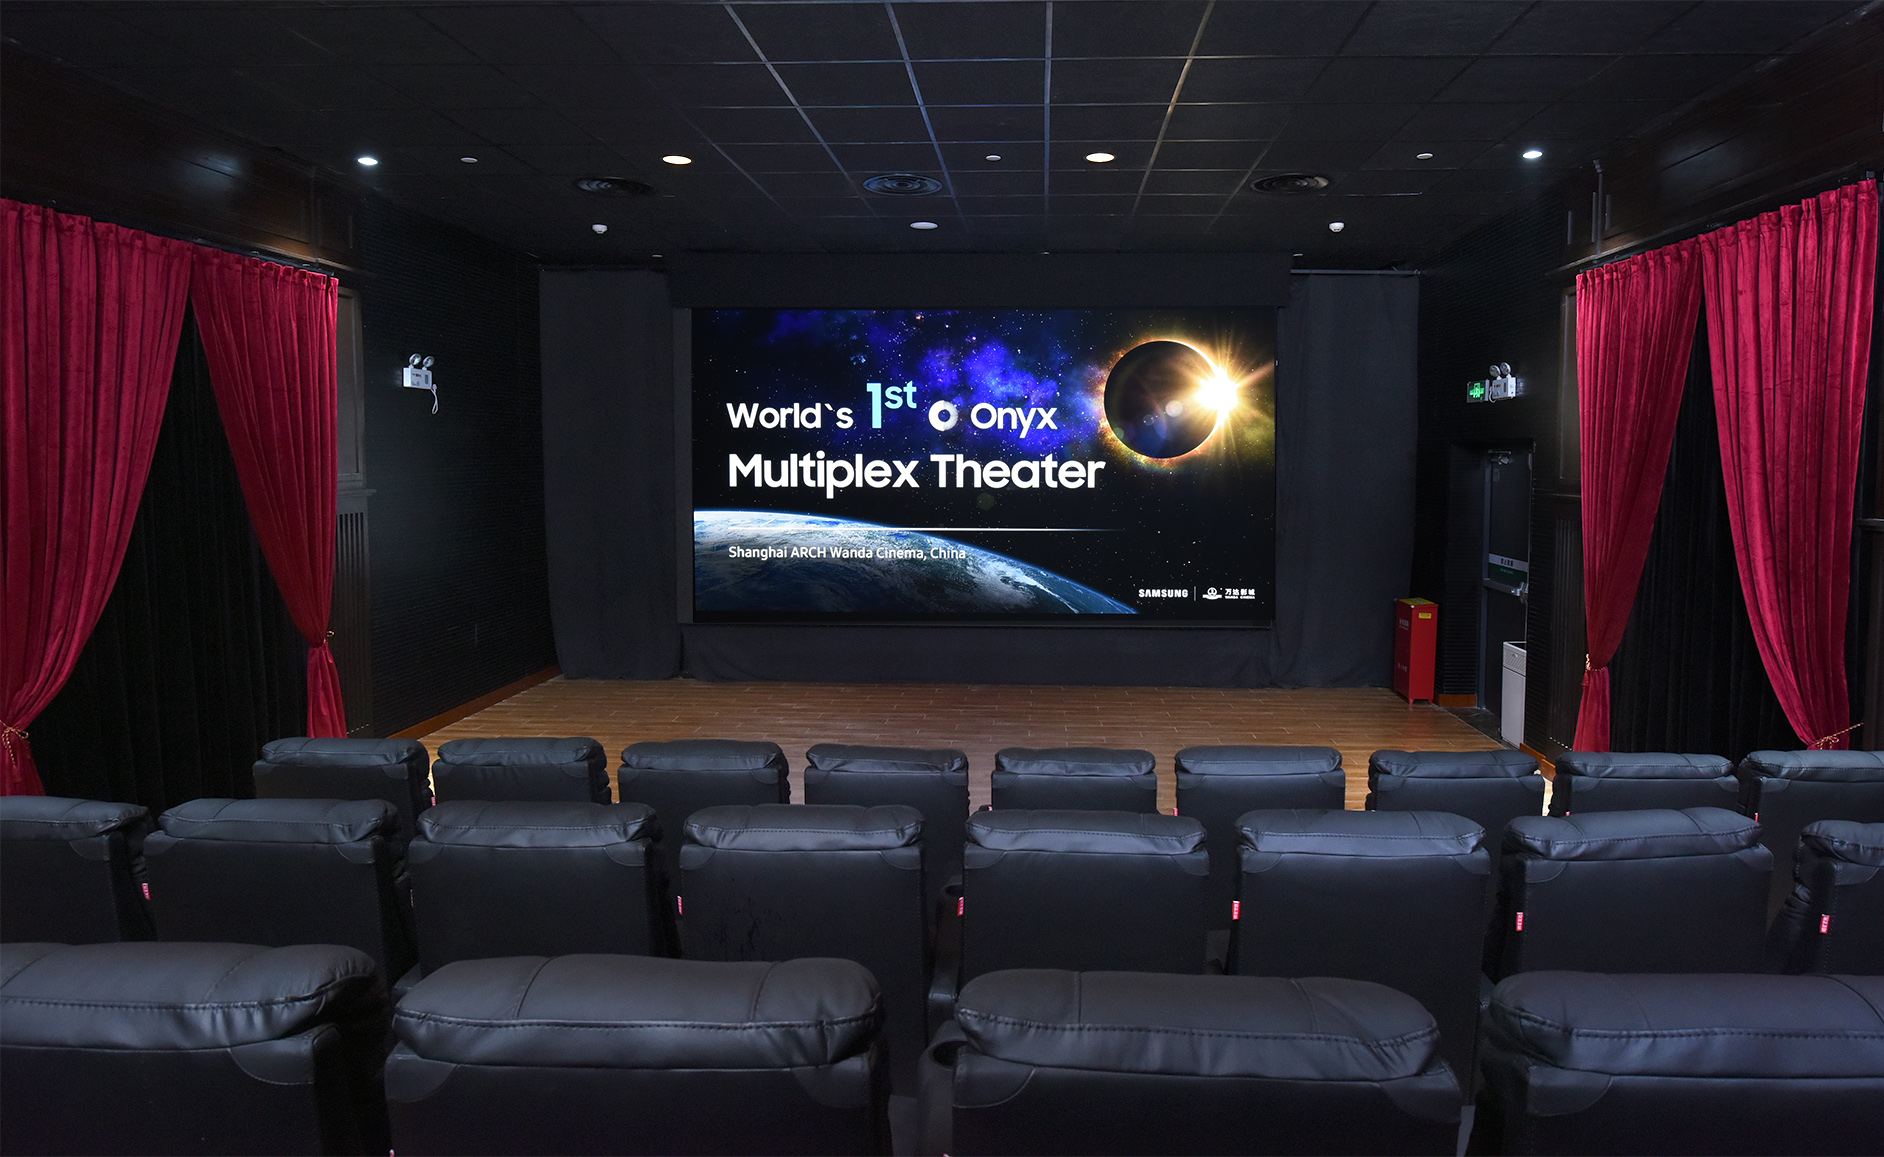 Samsung Launches World’s First Onyx Multiplex Theater in Shanghai